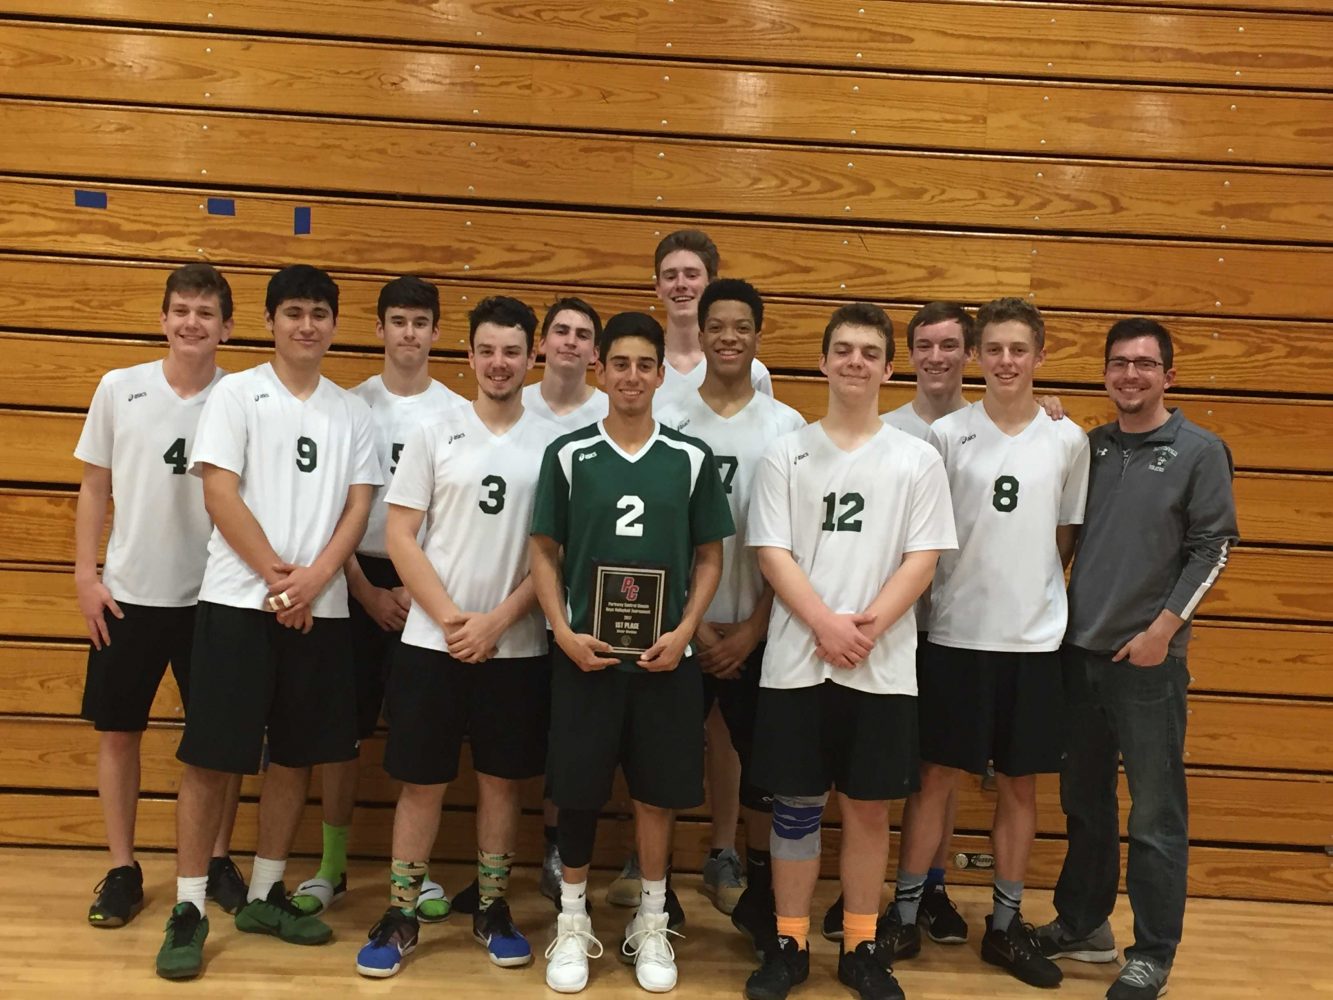 The varsity team placed first in the silver division in the Parkway Centrals Varsity Tournament. 